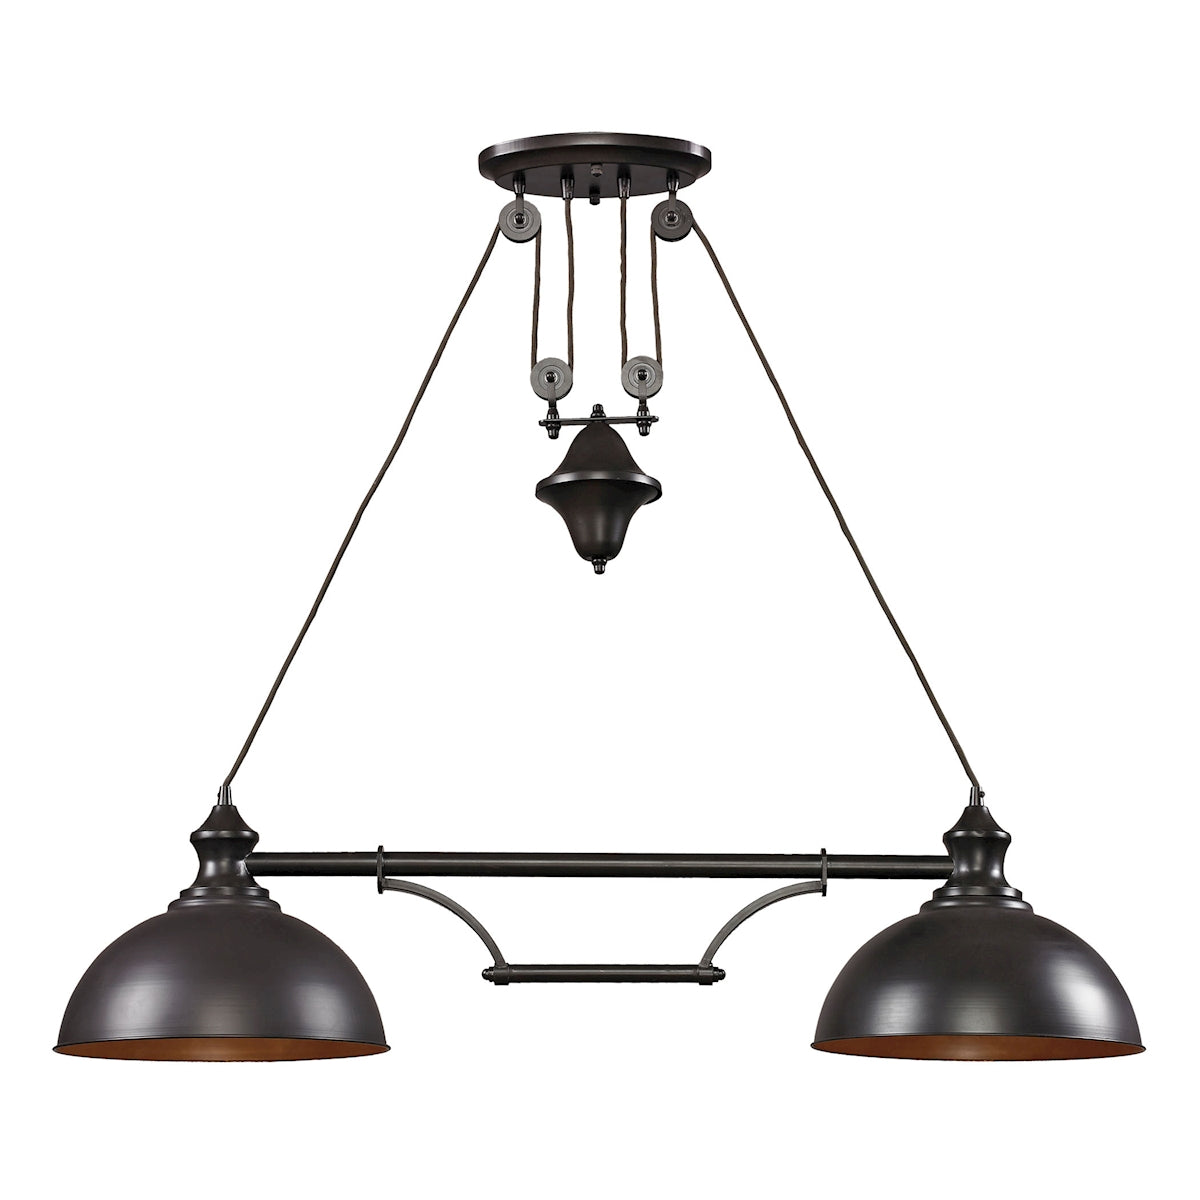 ELK Lighting 65150-2 Farmhouse 2-Light Island Light in Oiled Bronze with Matching Shade